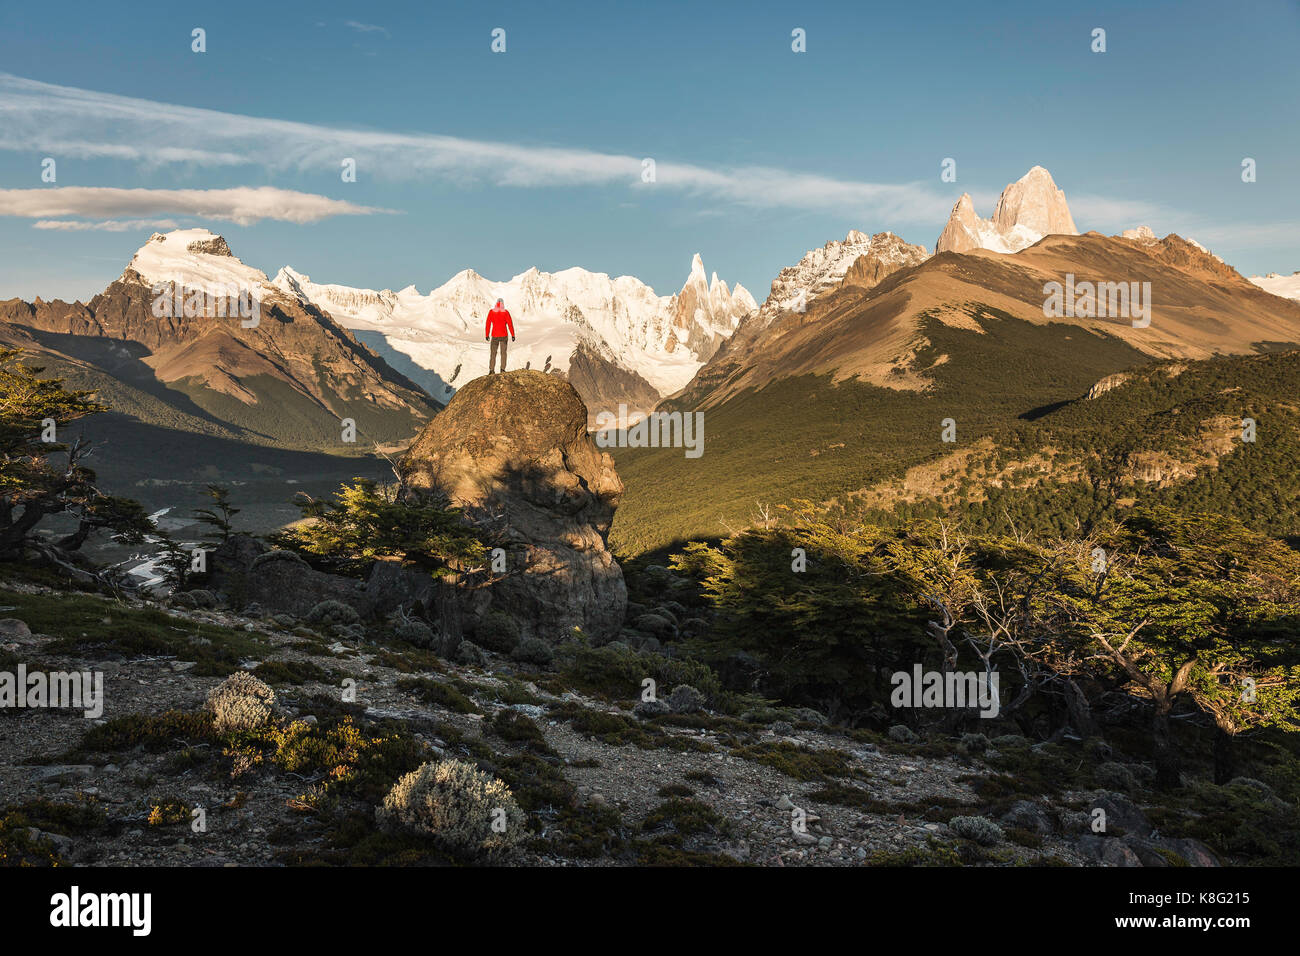 Male hiker looking out Cerro Torre and Fitz Roy mountain range in Los Glaciares National Park, Patagonia, Argentina Stock Photo